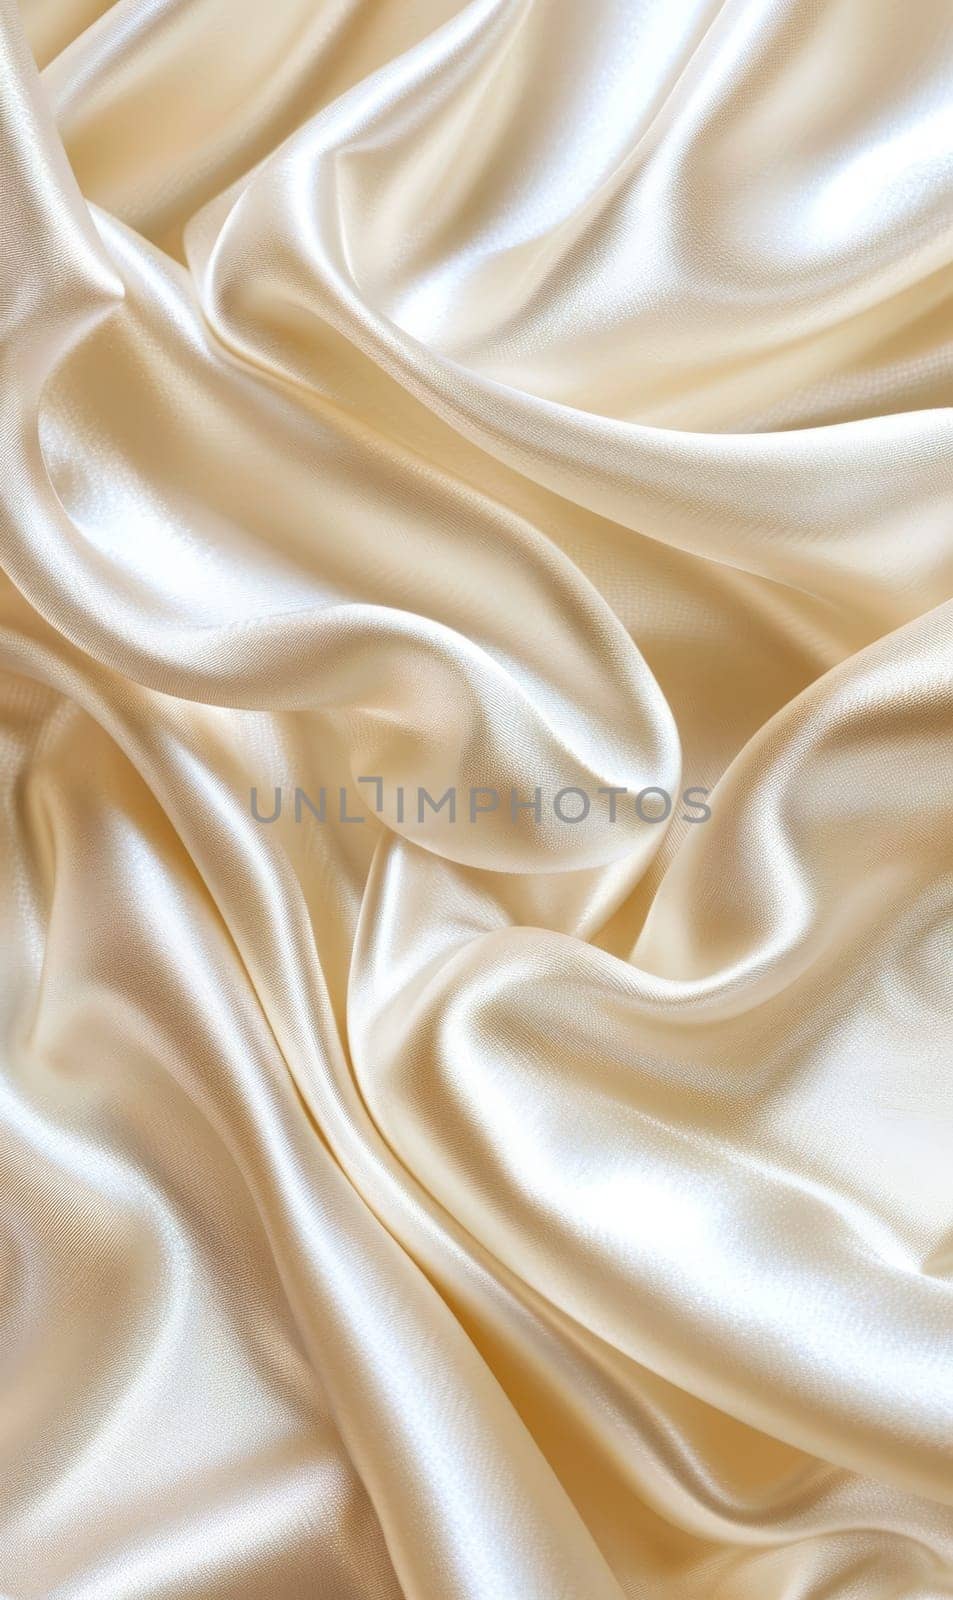 Elegant waves of high-quality cream silk fabric with a lustrous sheen, perfect for backgrounds or luxury design themes